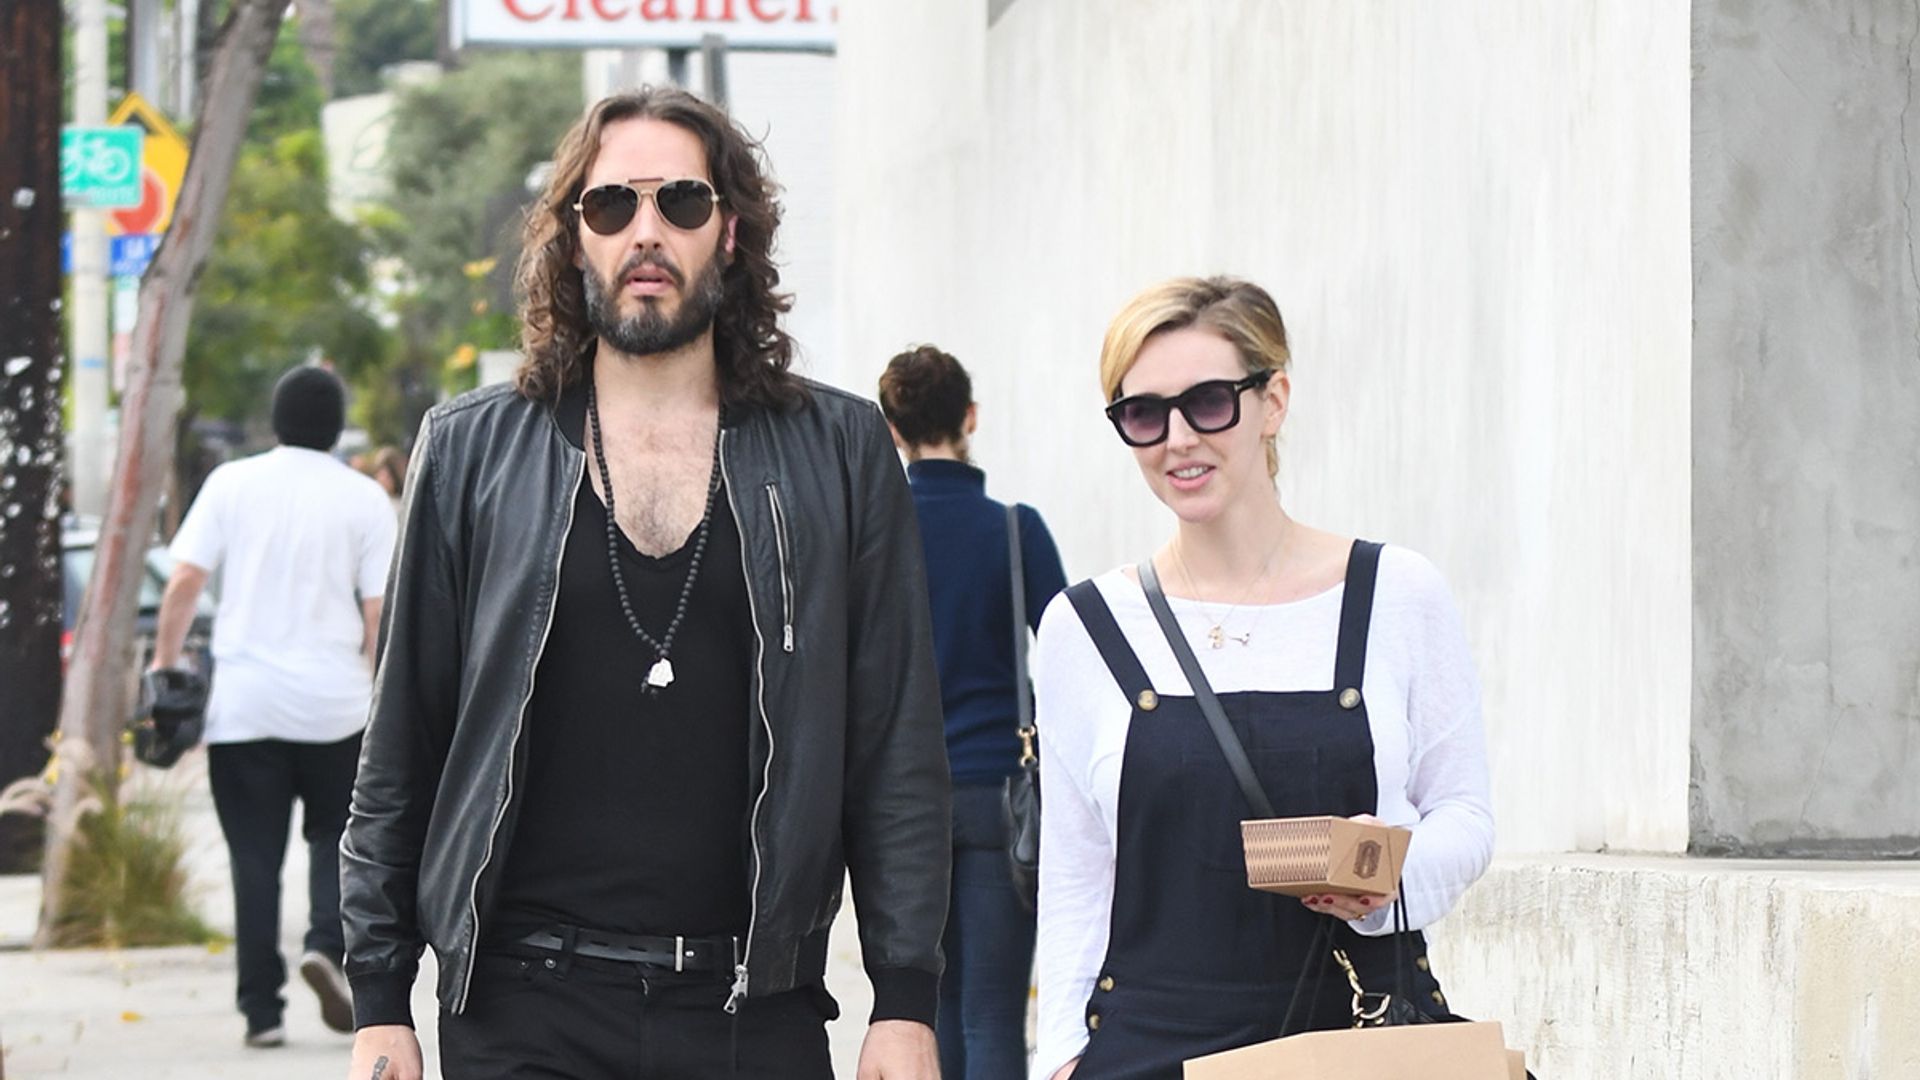 Who is Russell Brand's wife?